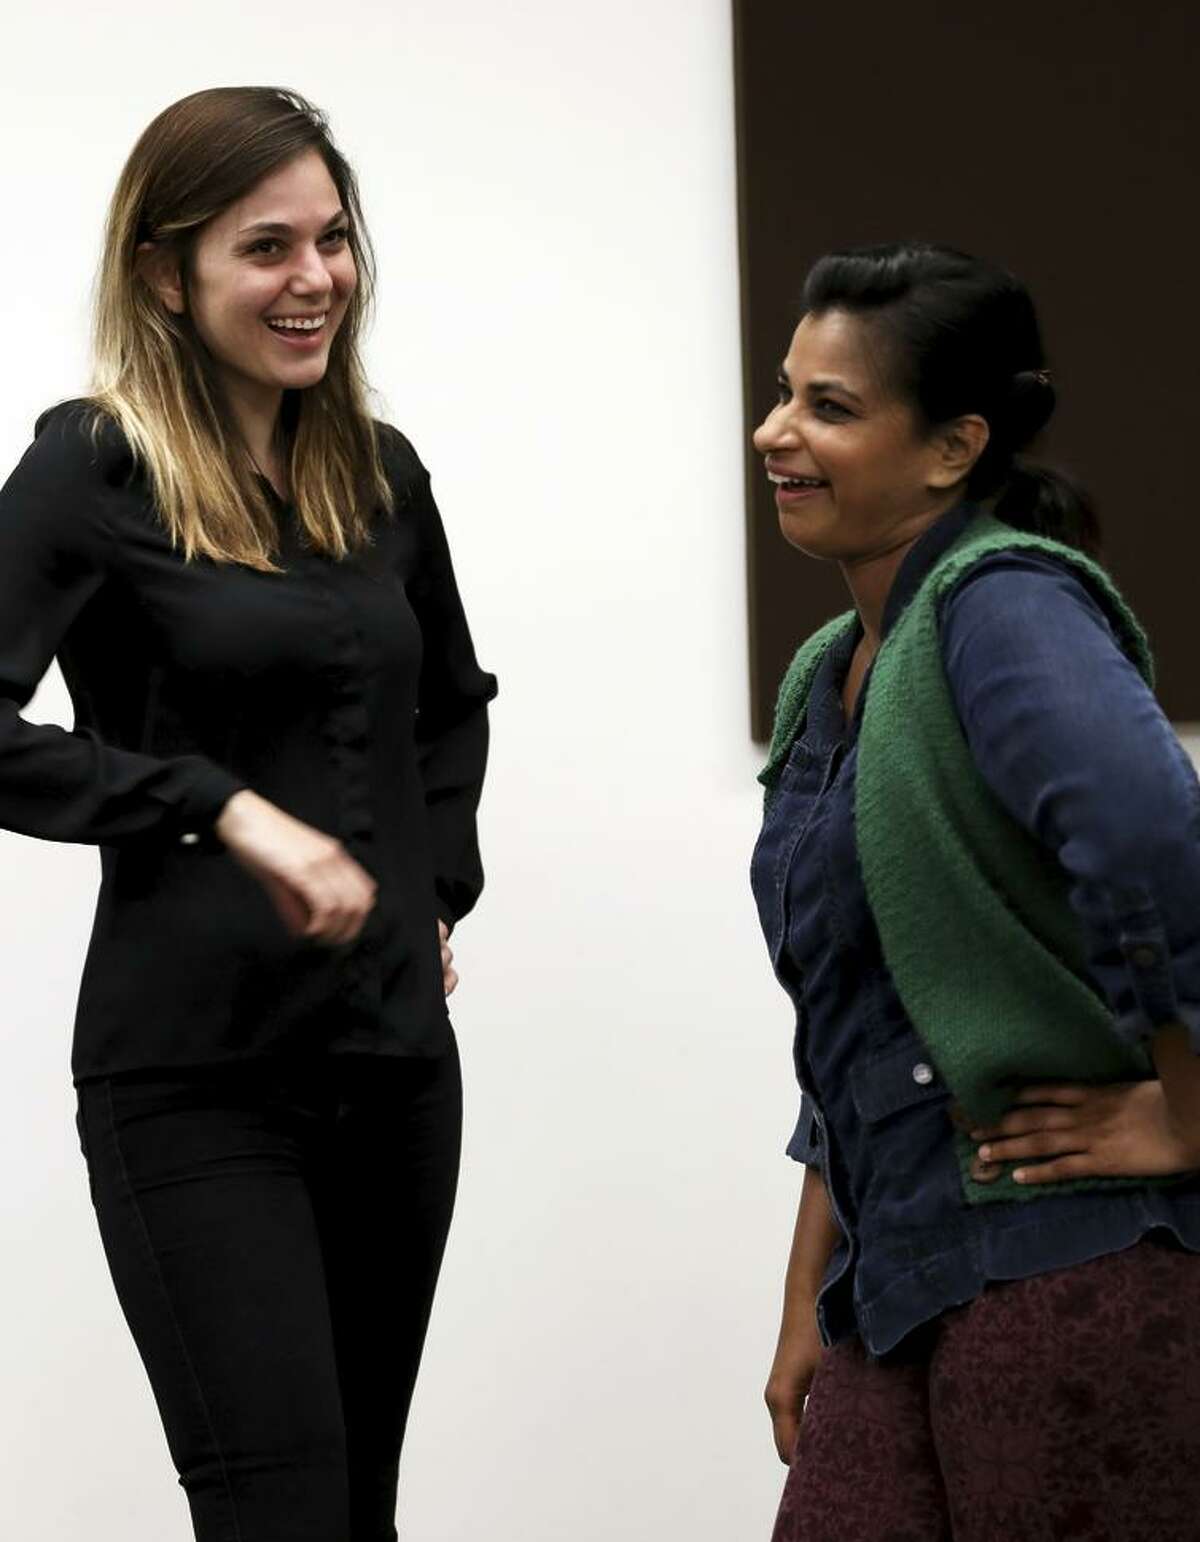 Rebekah Dial (left) and Radhika Rao perform an improv class exercise at Intersection for the Arts.